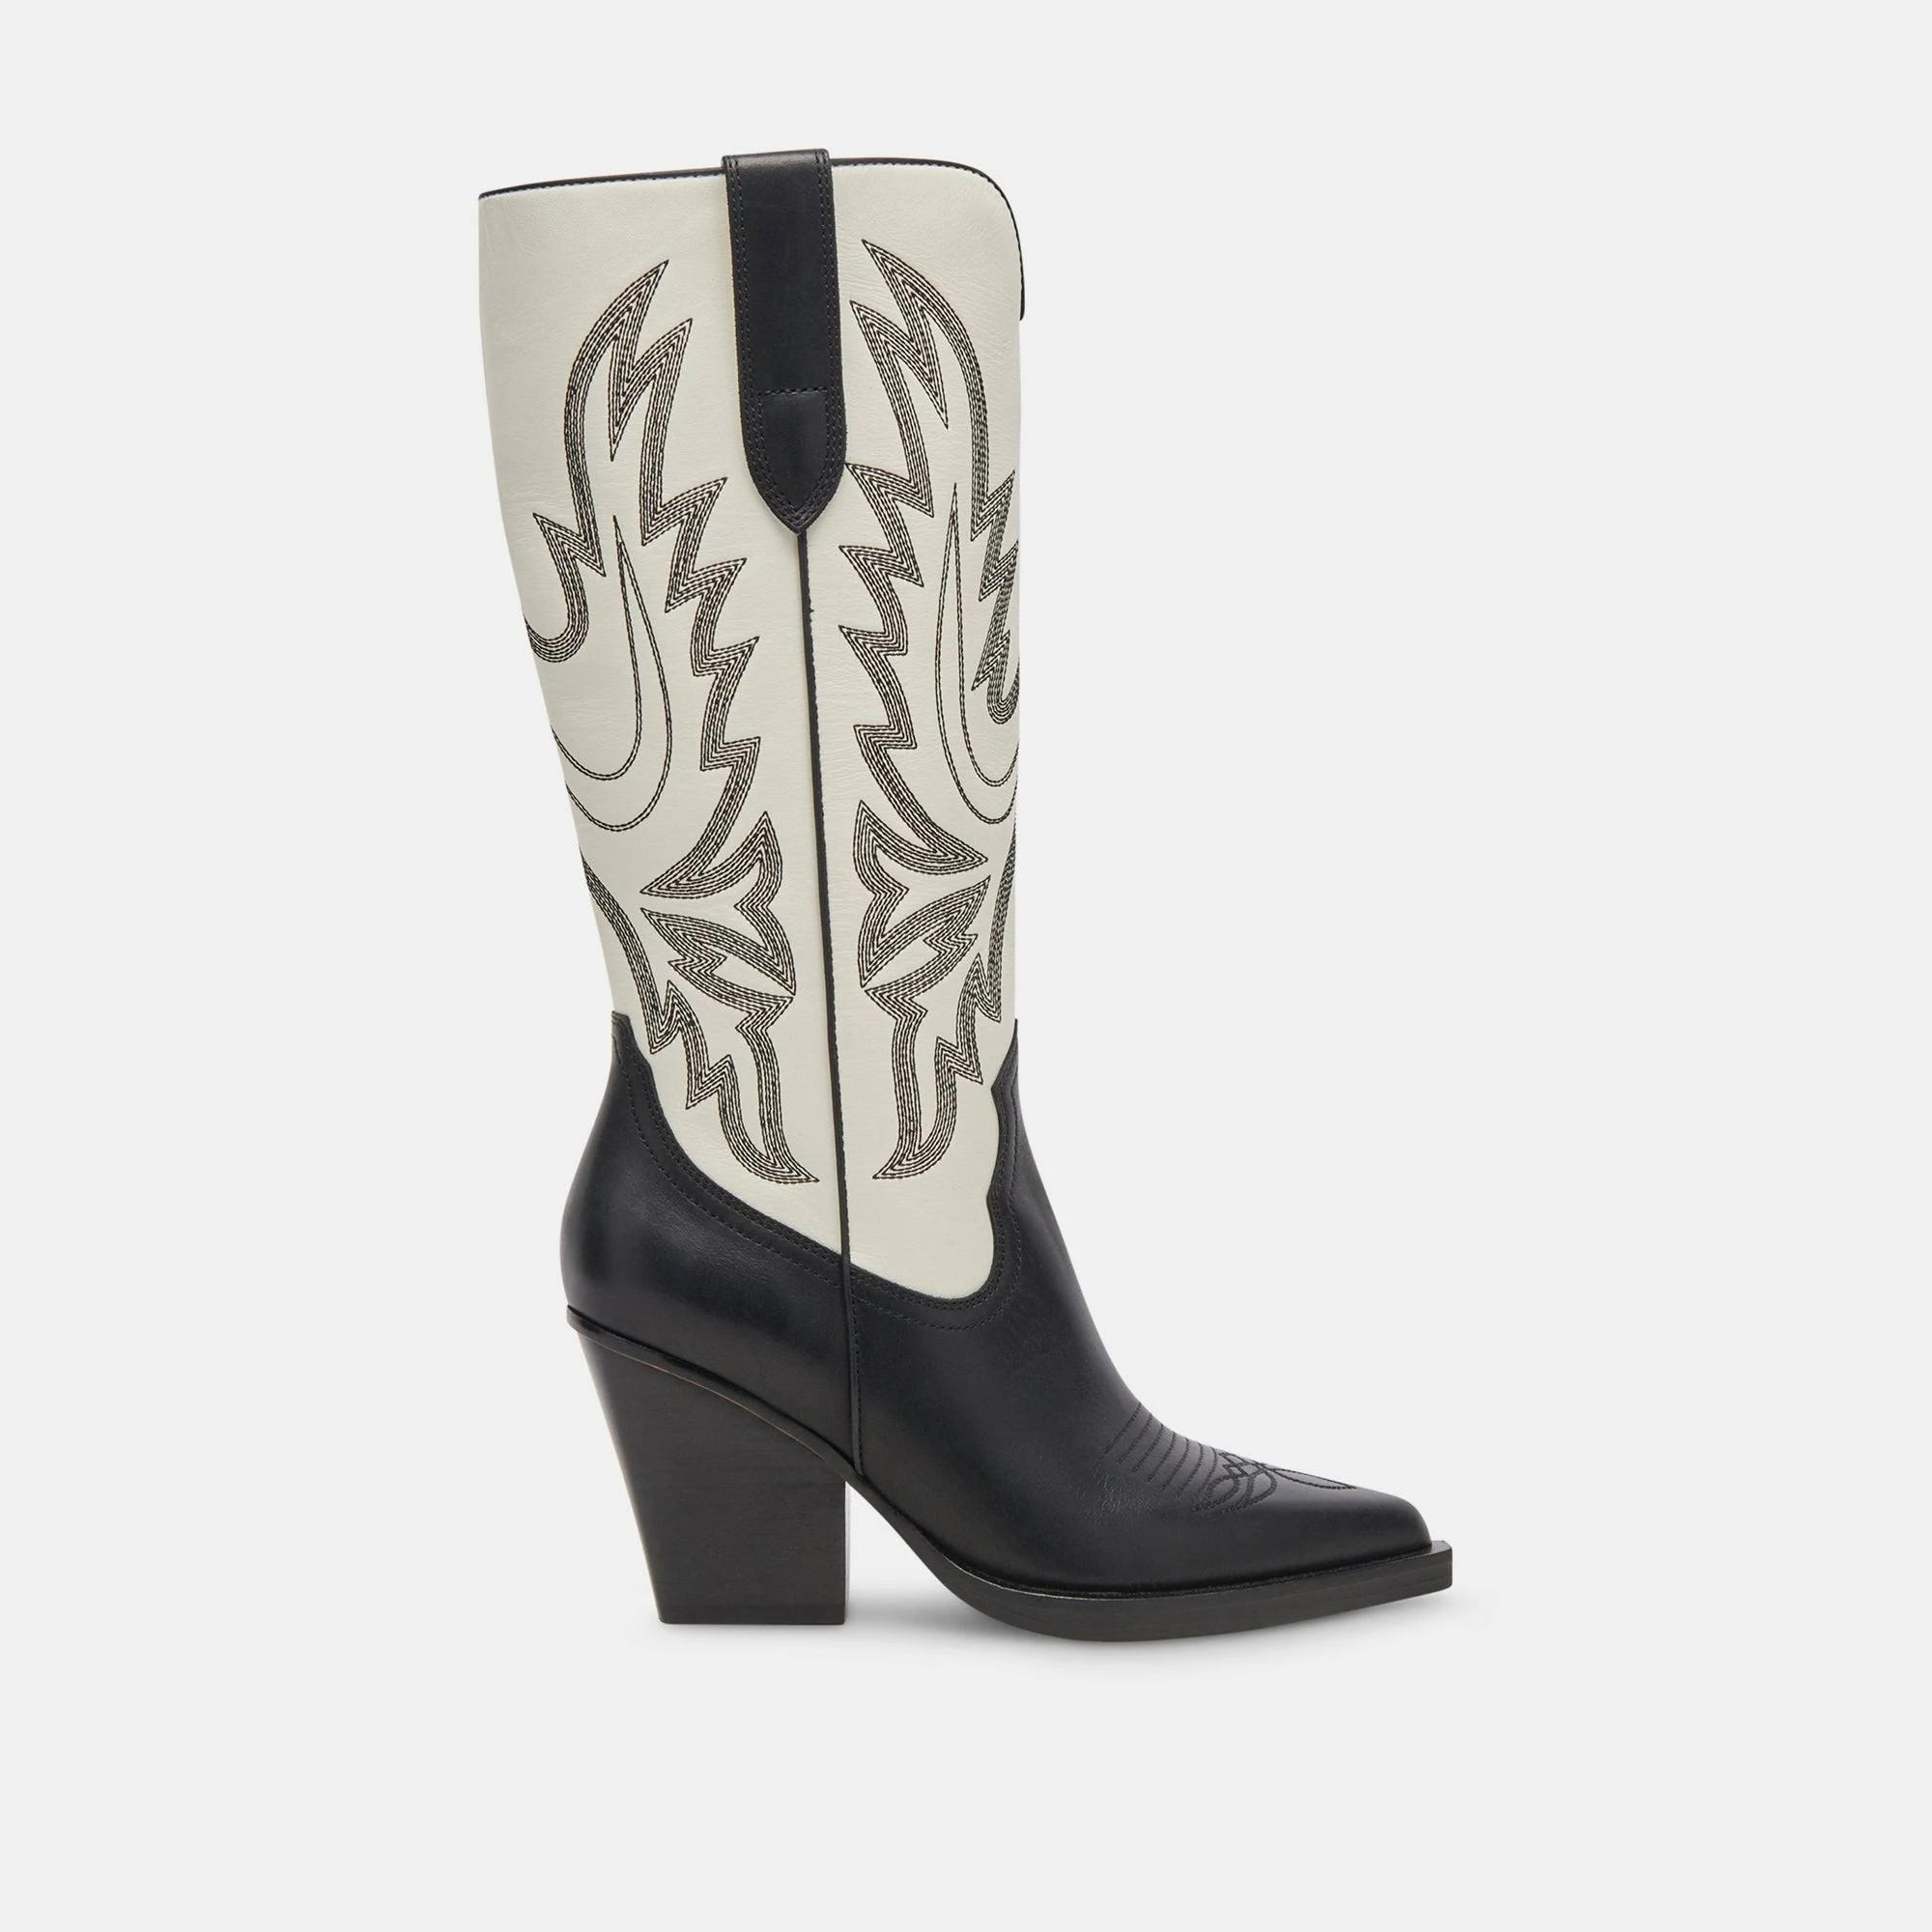 Knee-High Cowboy Boots with Stack Heel - Black and White Design | Image